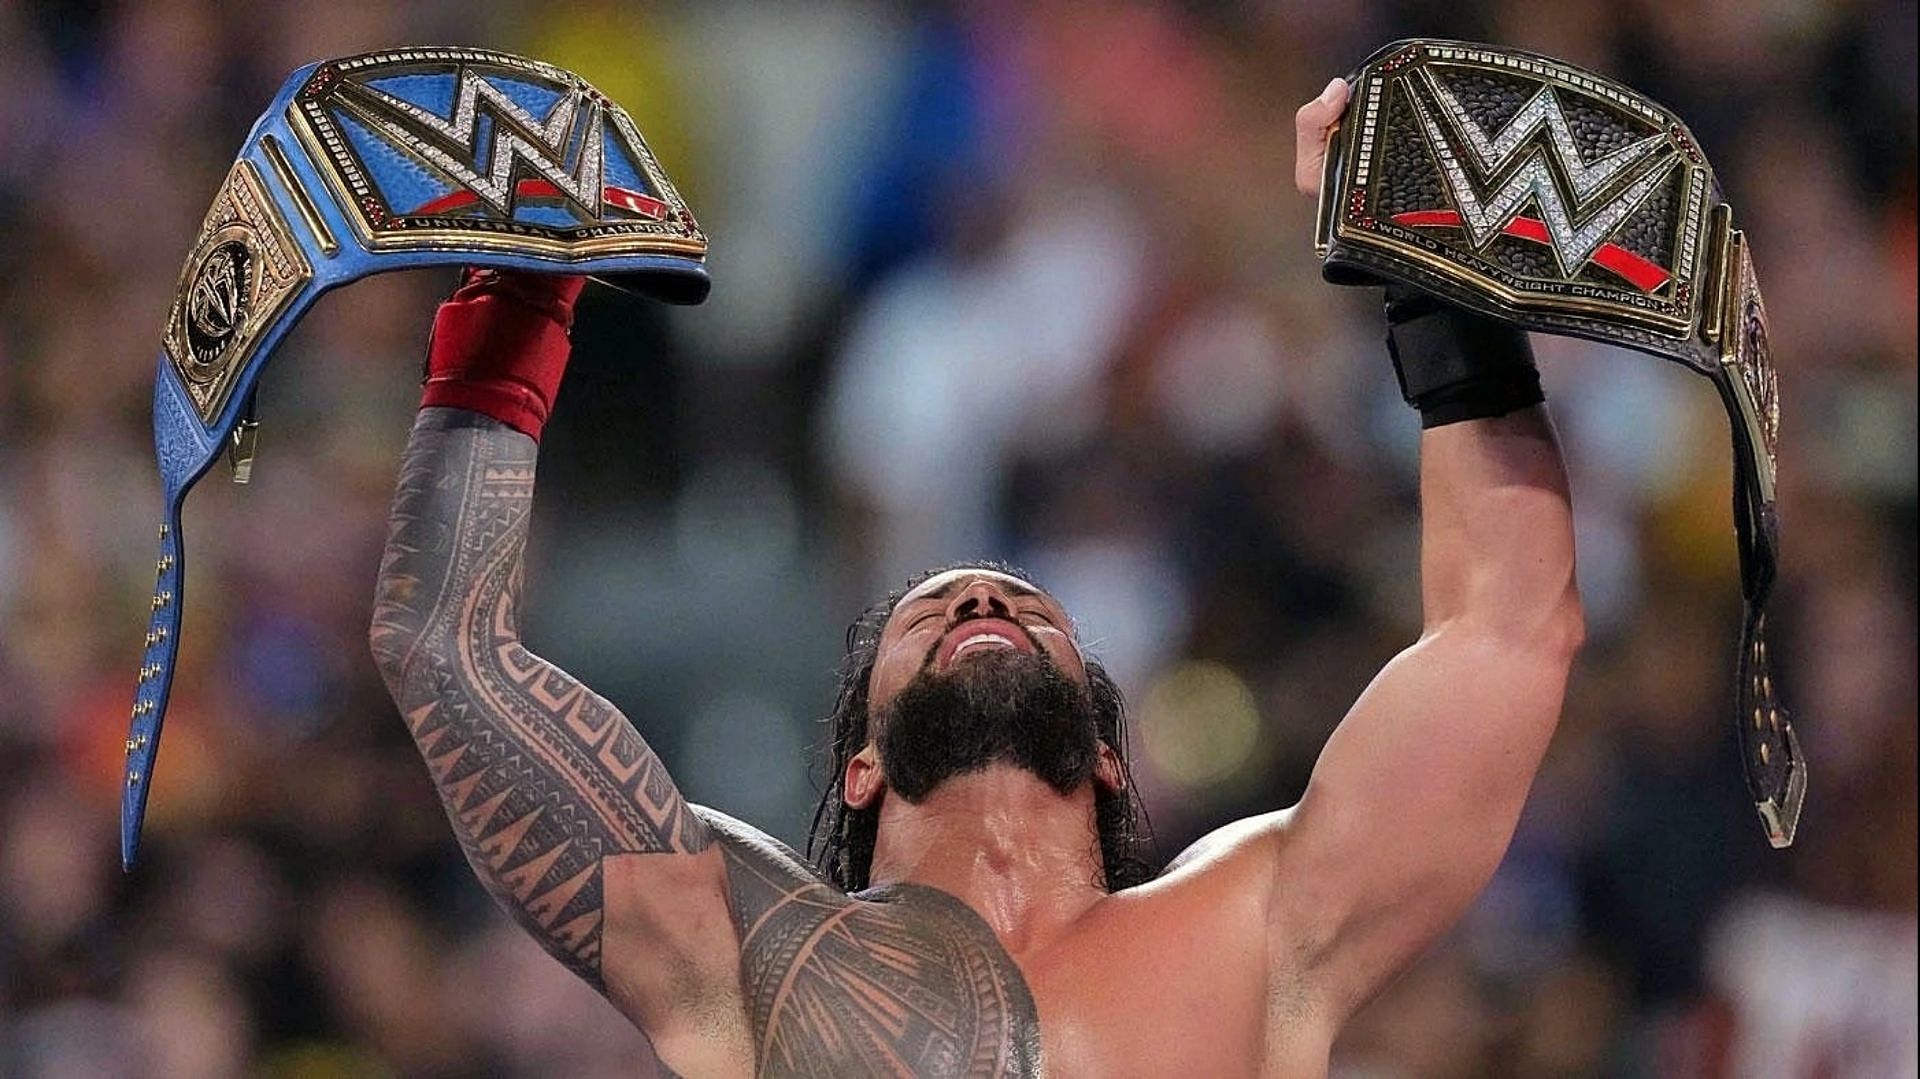 Roman Reigns holding the WWE and the Universal titles